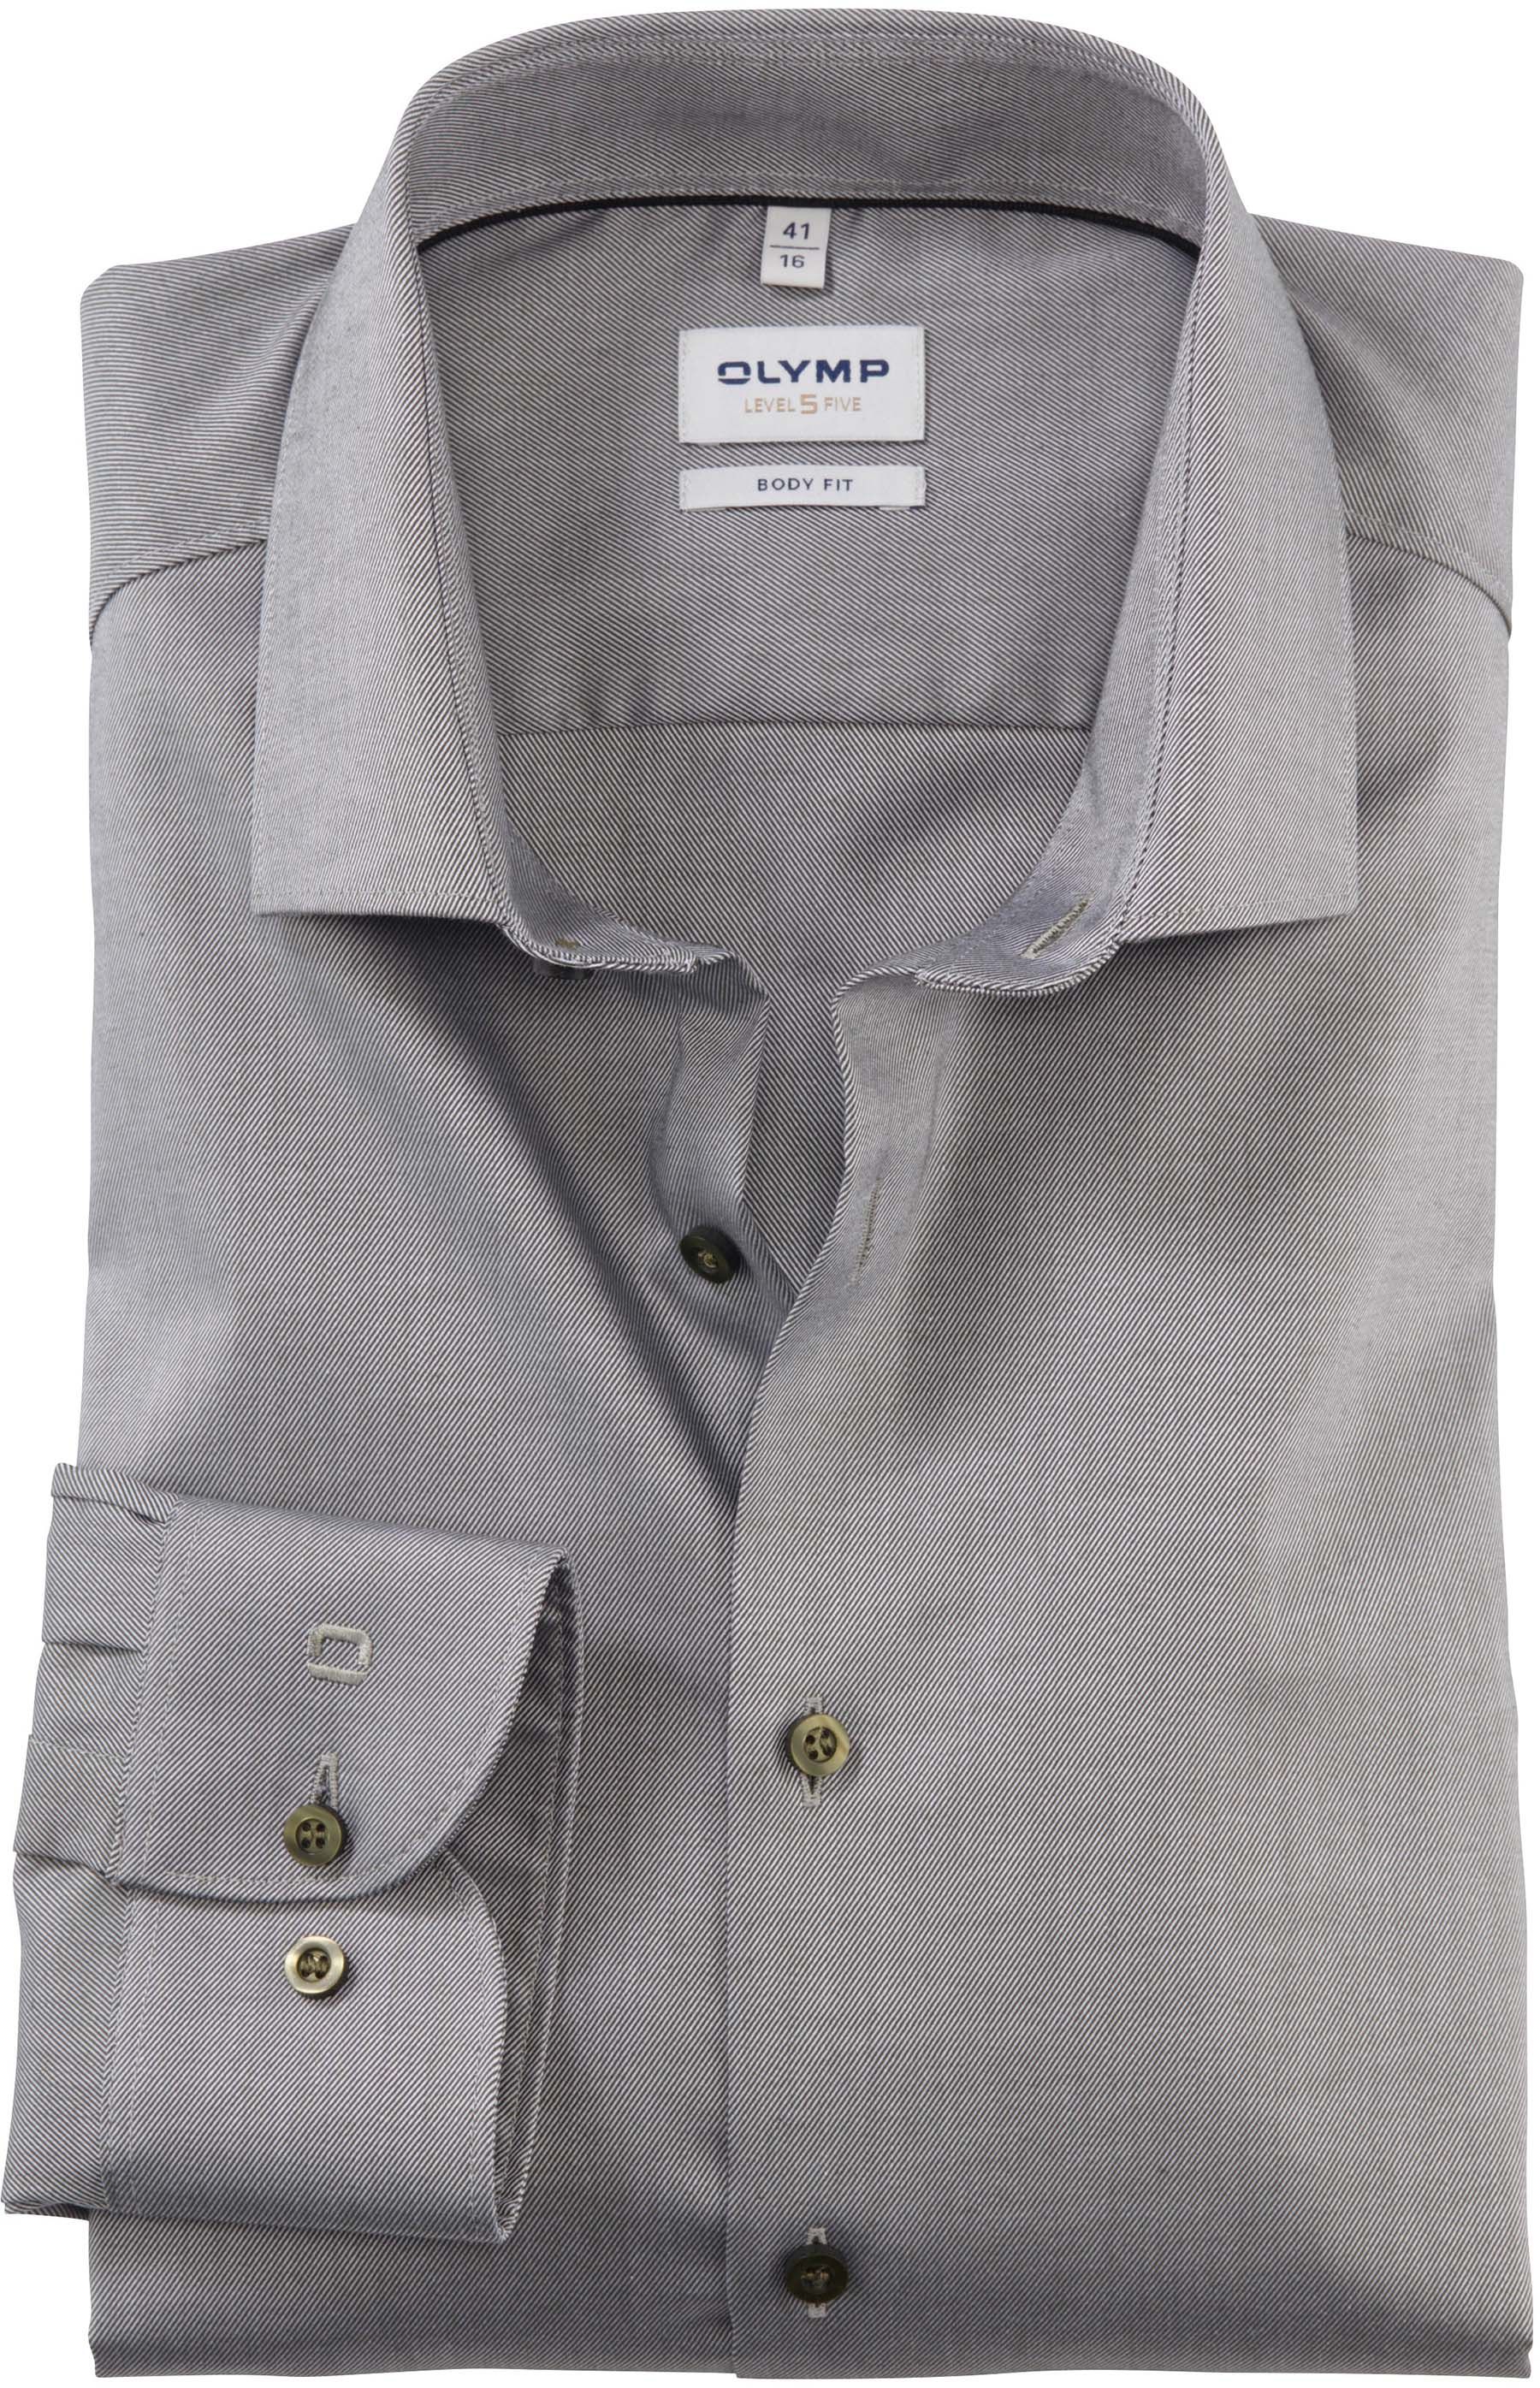 OLYMP Shirt Level 5 Olive Green size 46 product